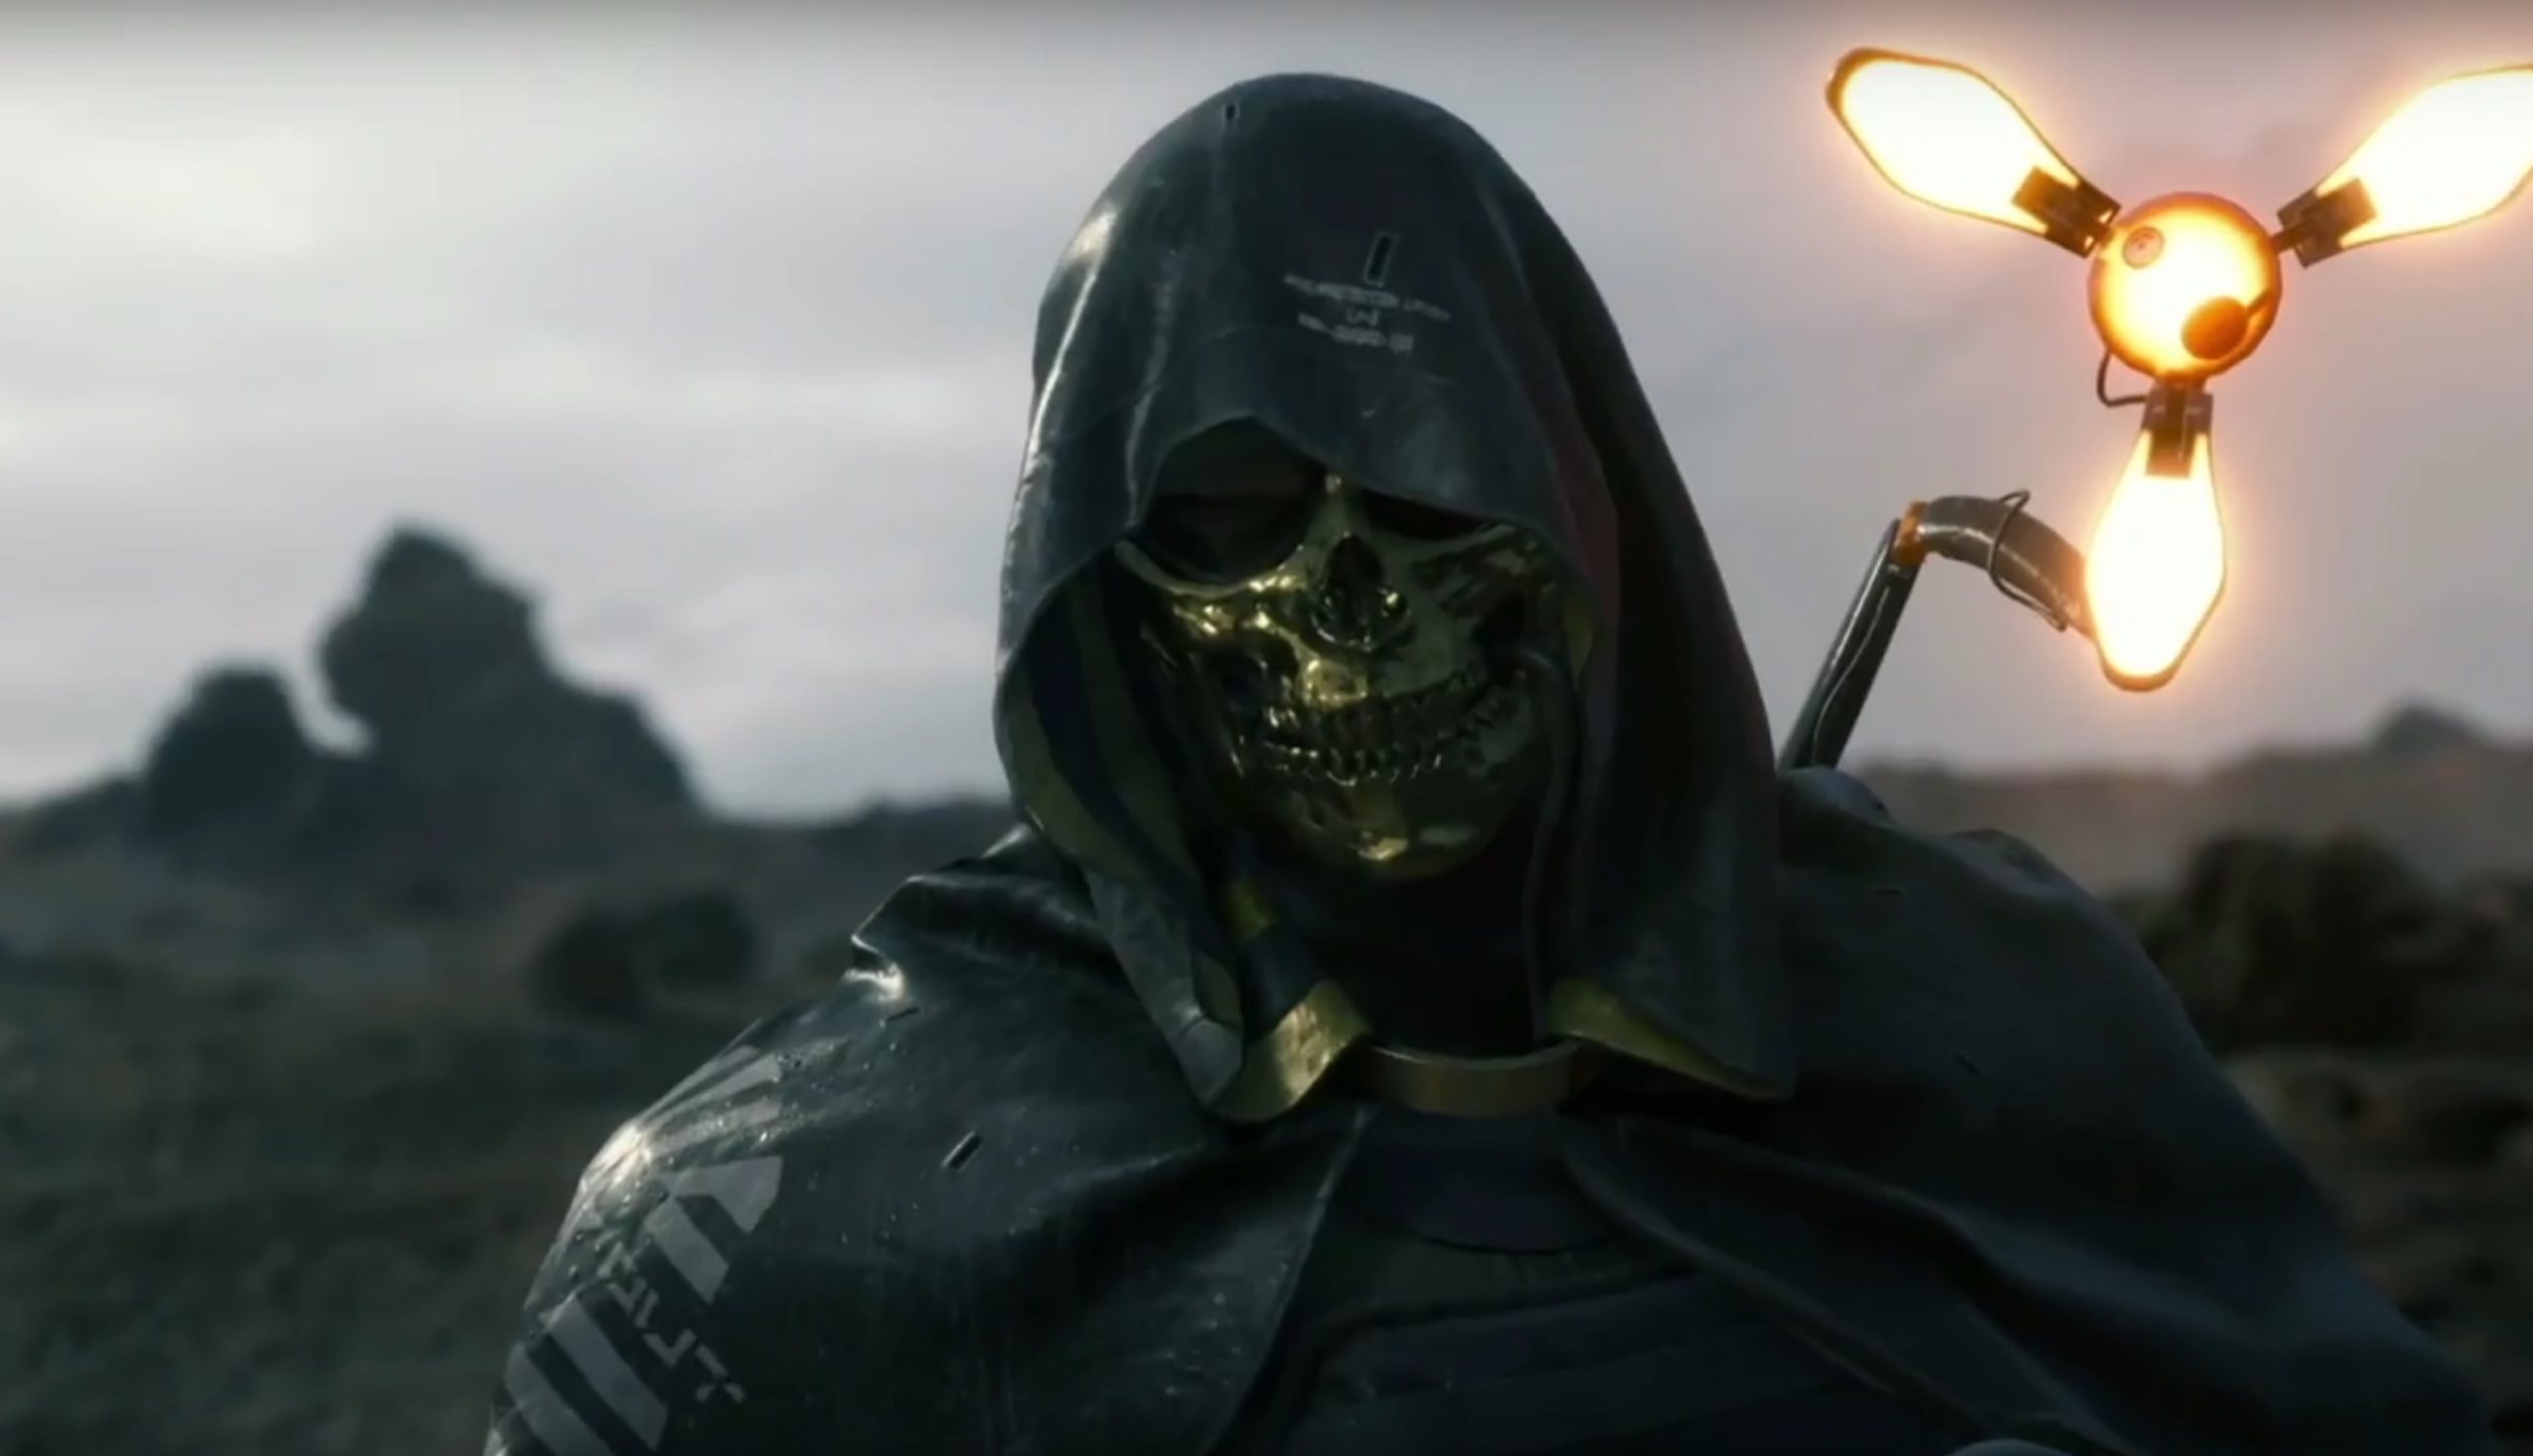 Weekly Trailer Round-Up: Death Stranding, Assassin’s Creed & More